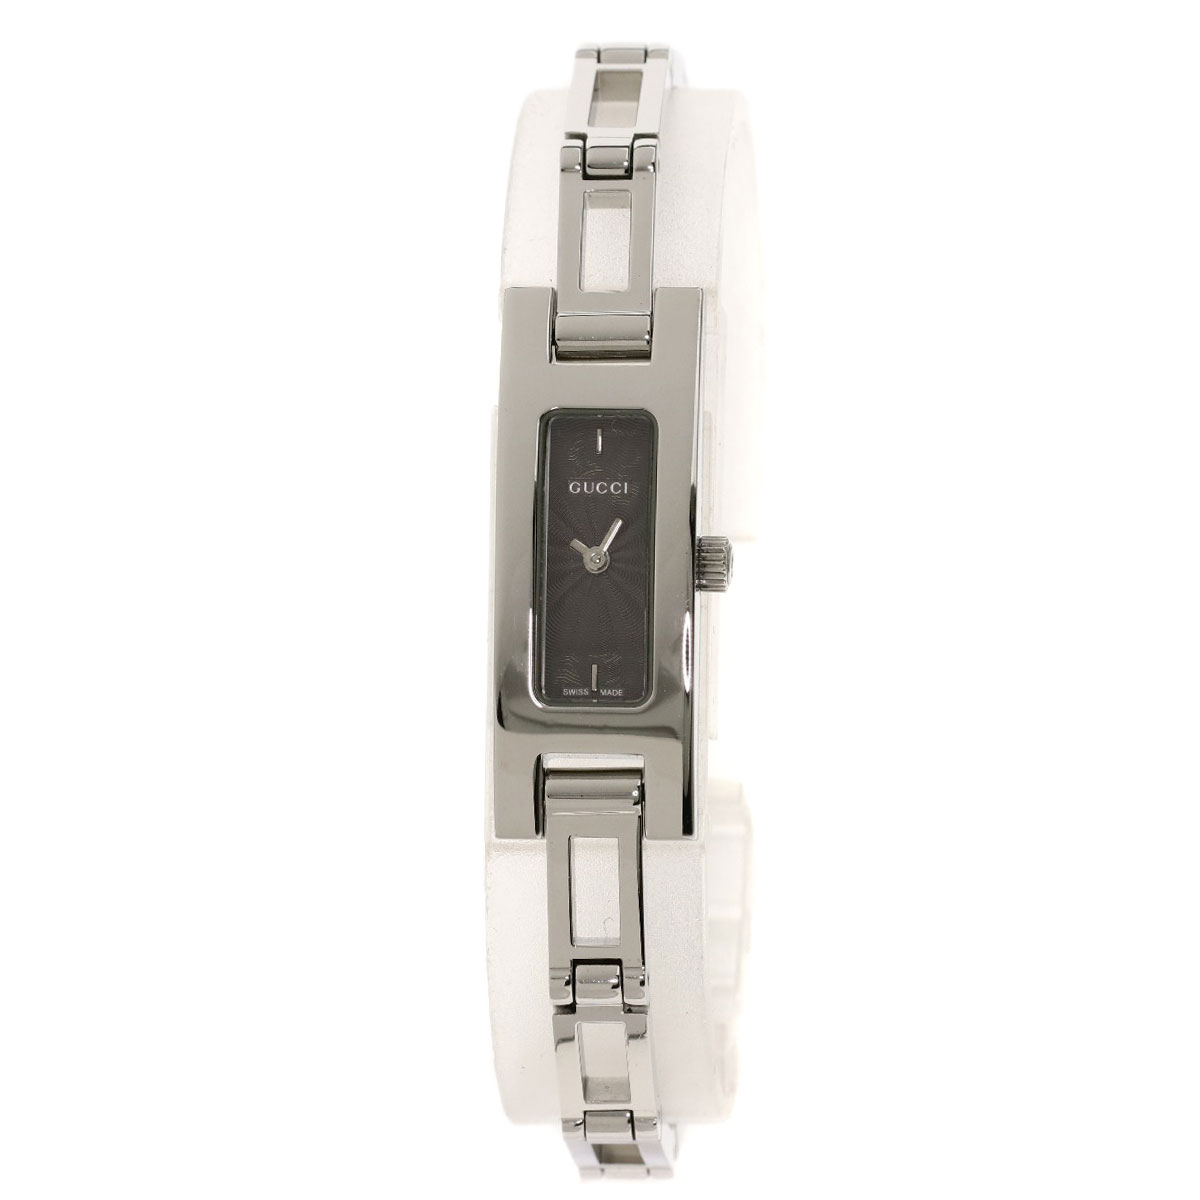 GUCCI Square face Watches 3900L Stainless Steel/Stainless Steel Ladies ...